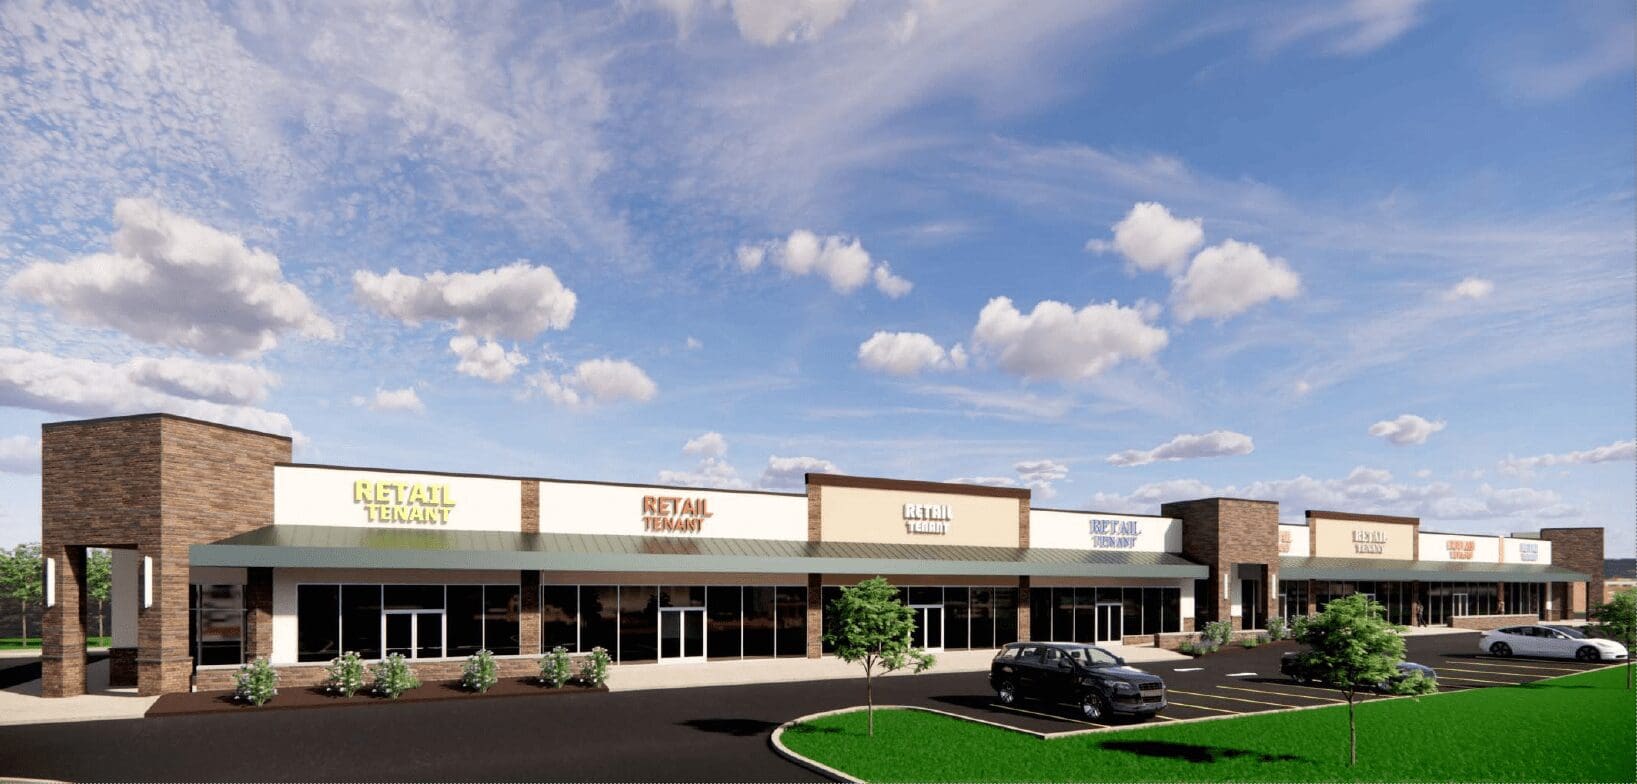 Featured image for “Reybold builds retail center near St. Andrews”